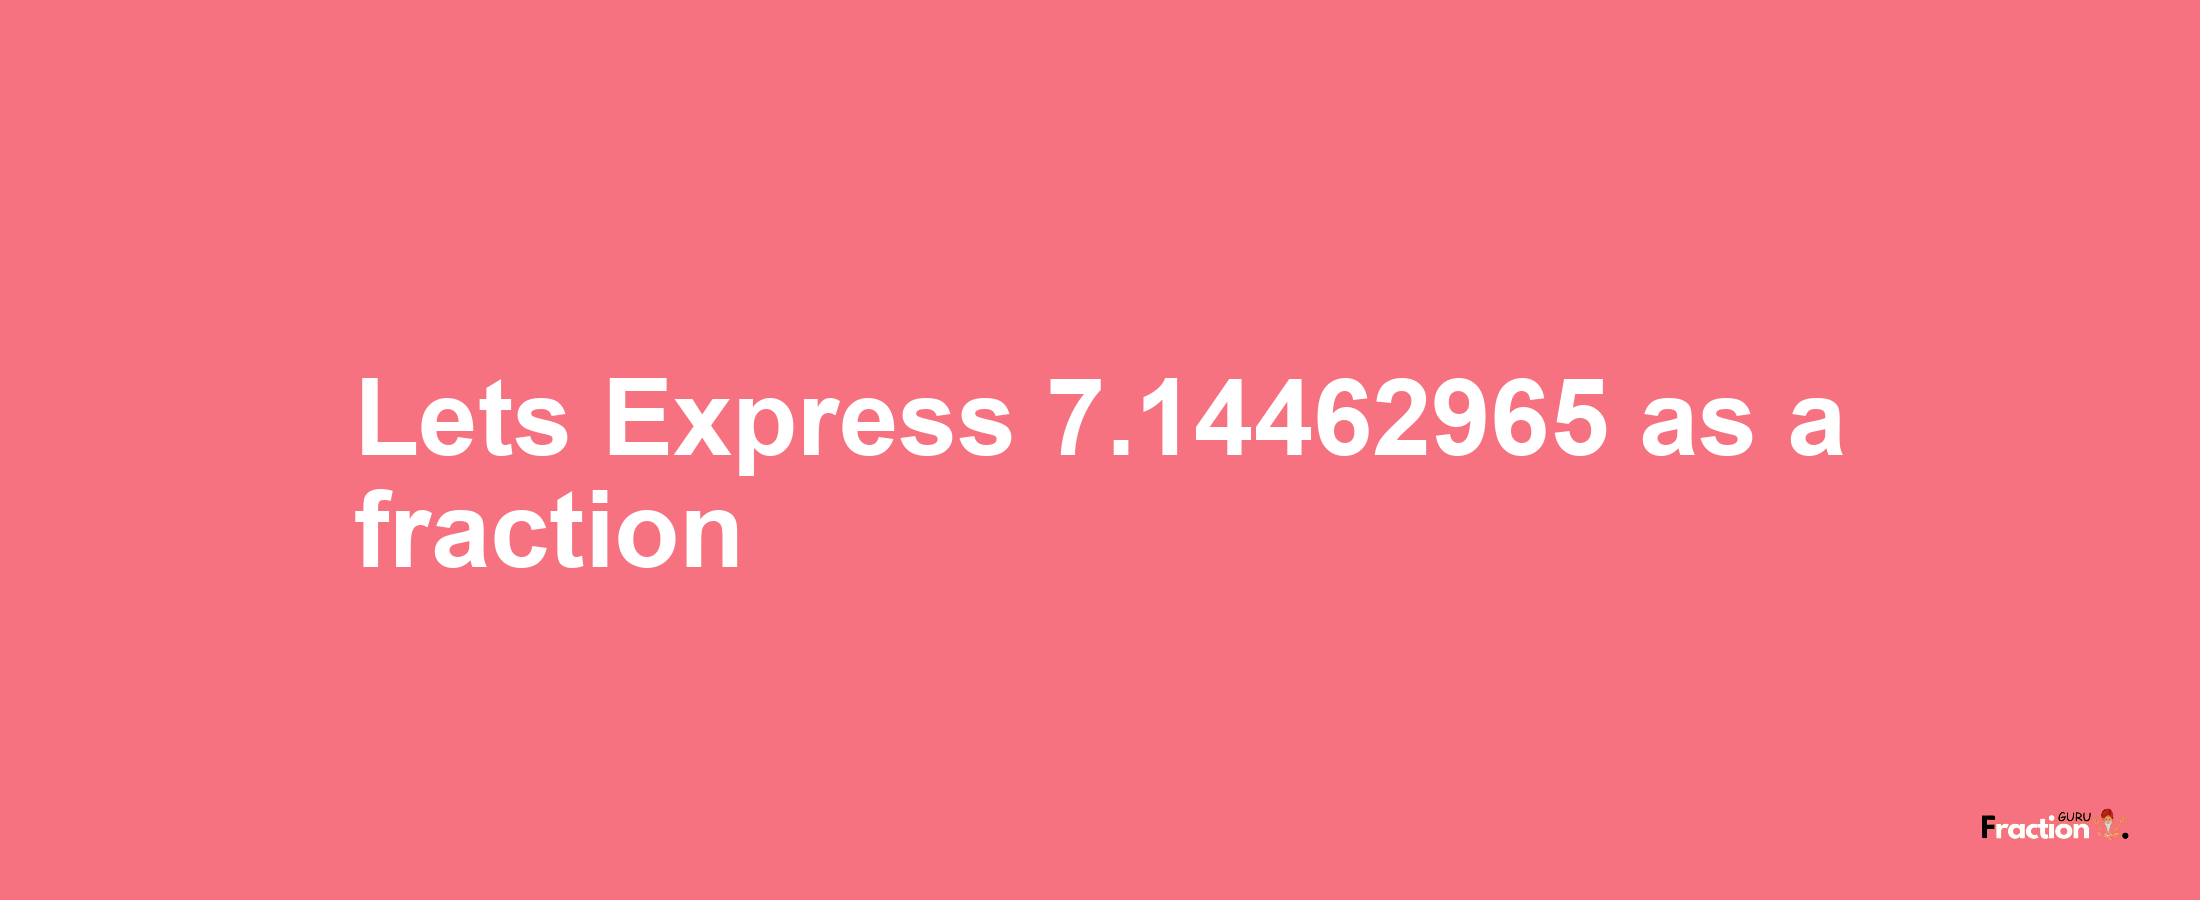 Lets Express 7.14462965 as afraction